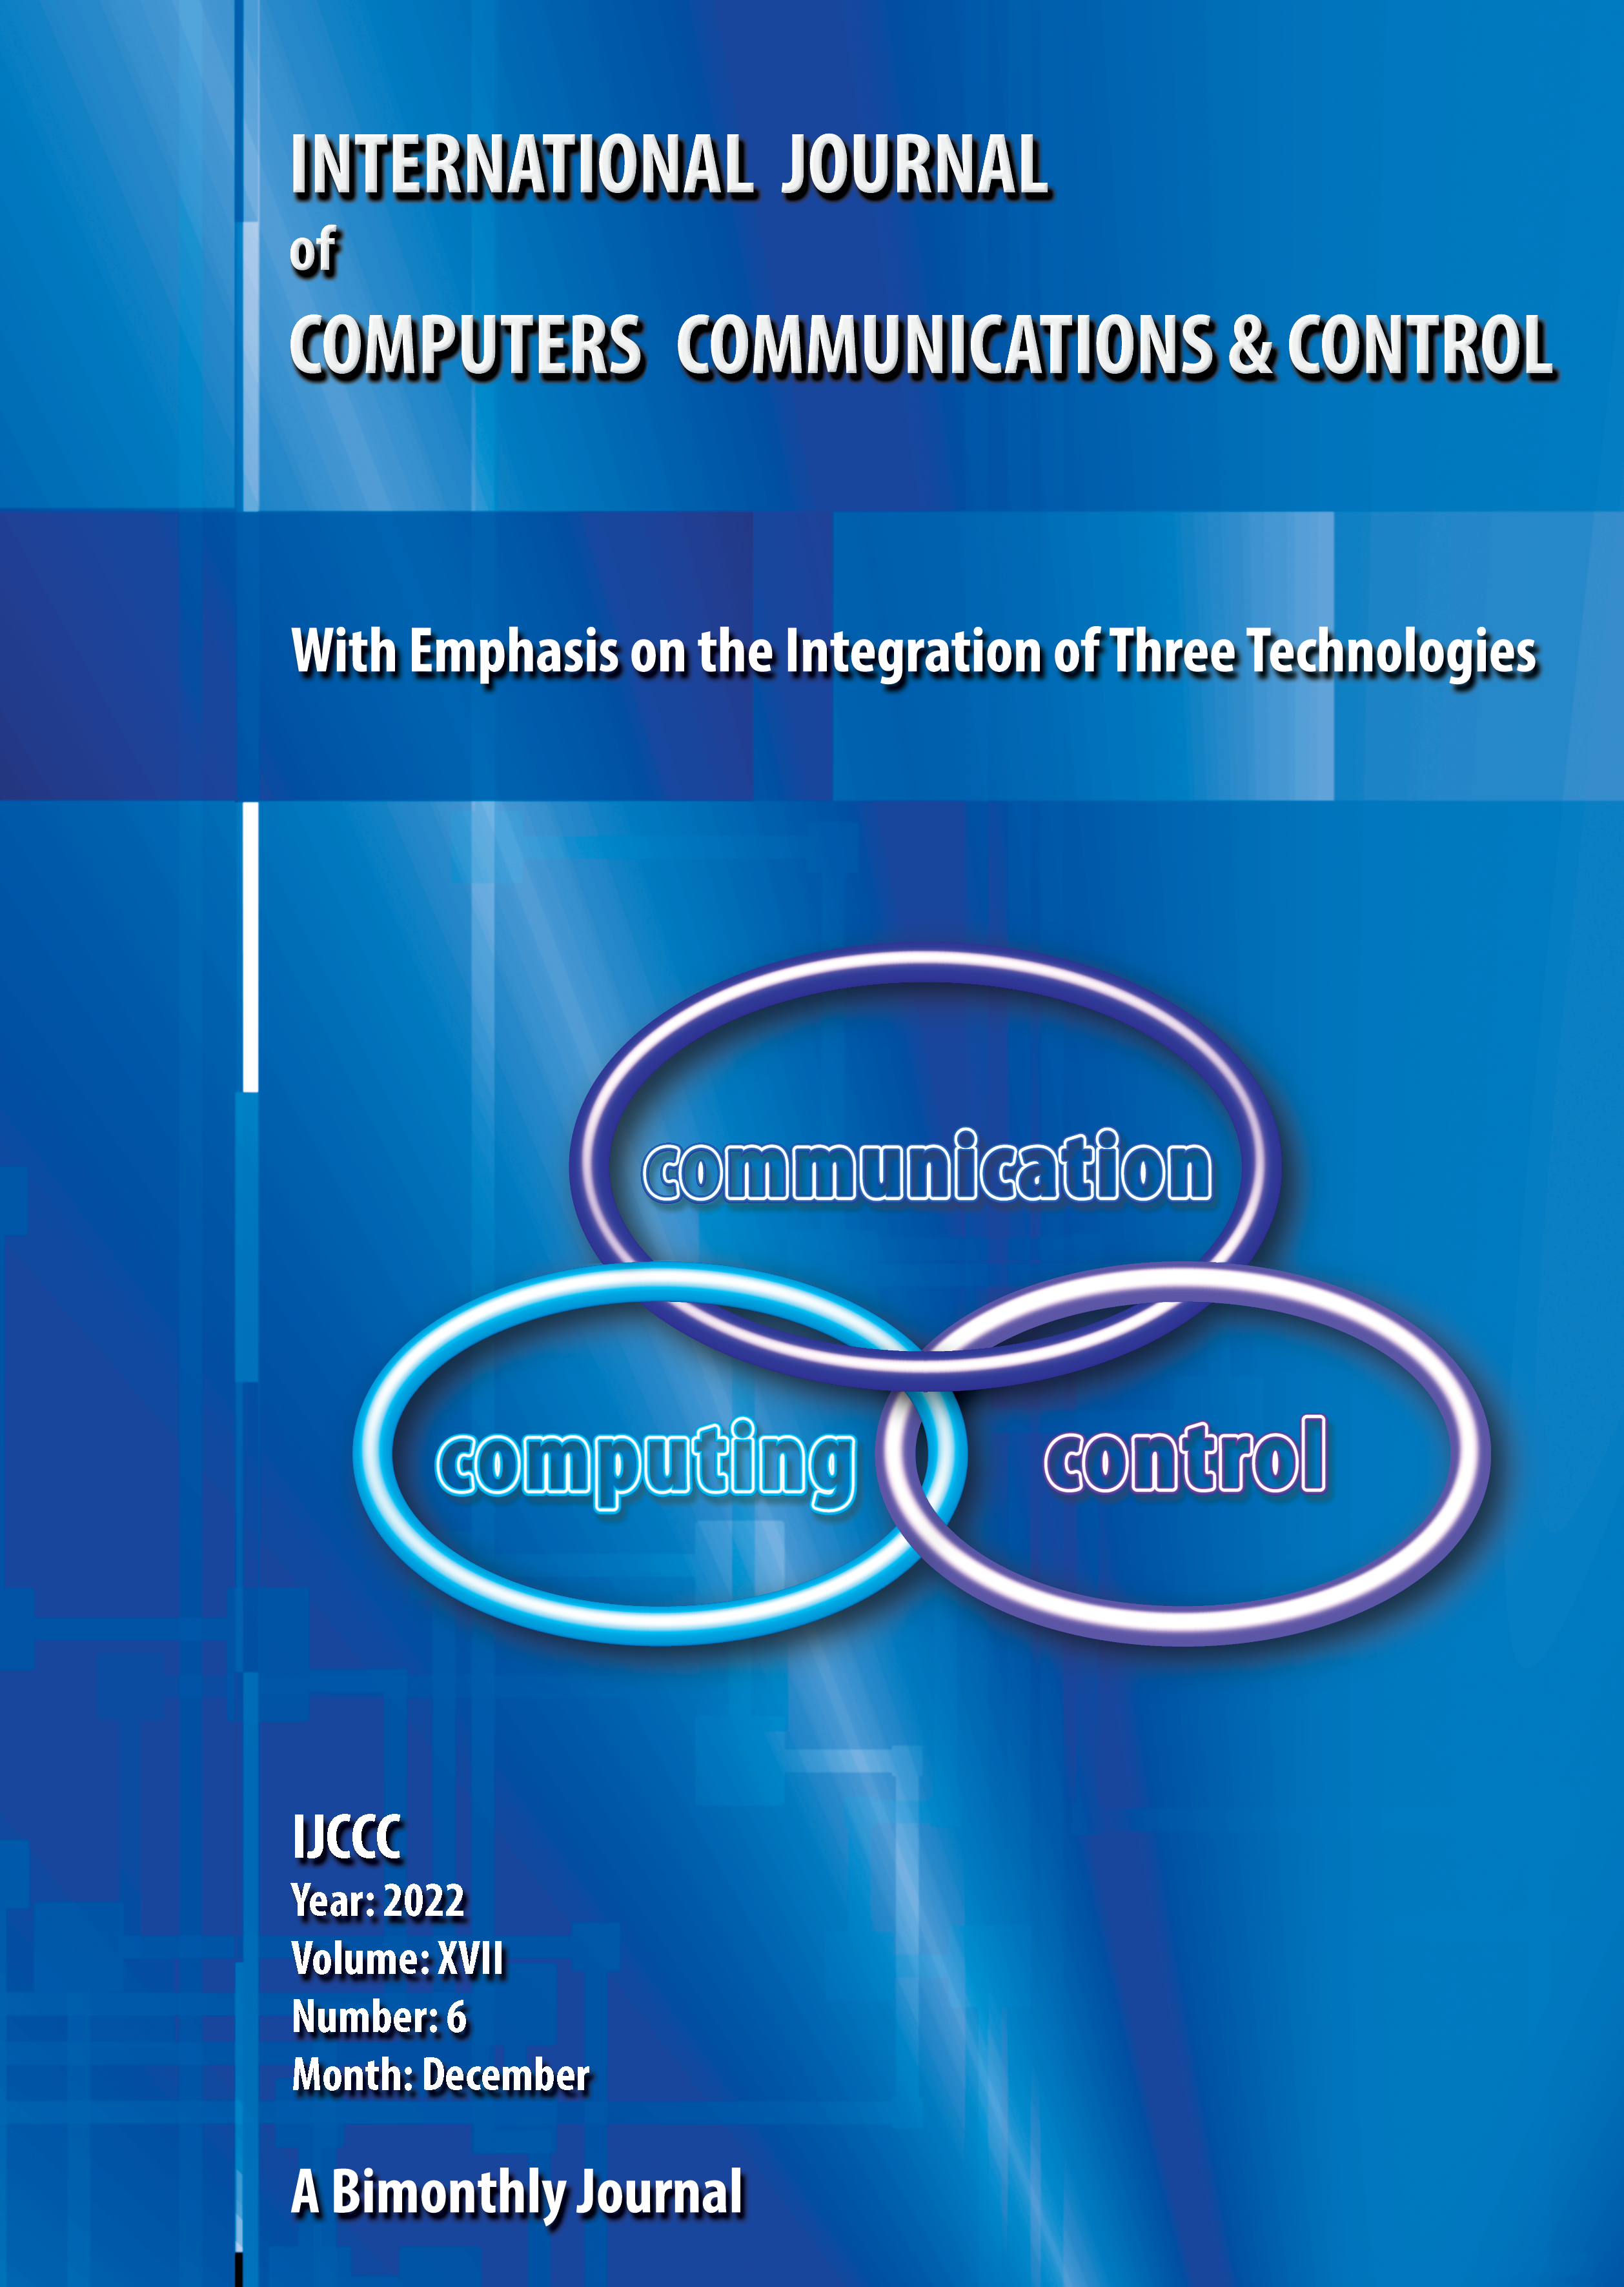 					View Vol. 17 No. 6 (2022): International Journal of Computers Communications & Control (December)
				